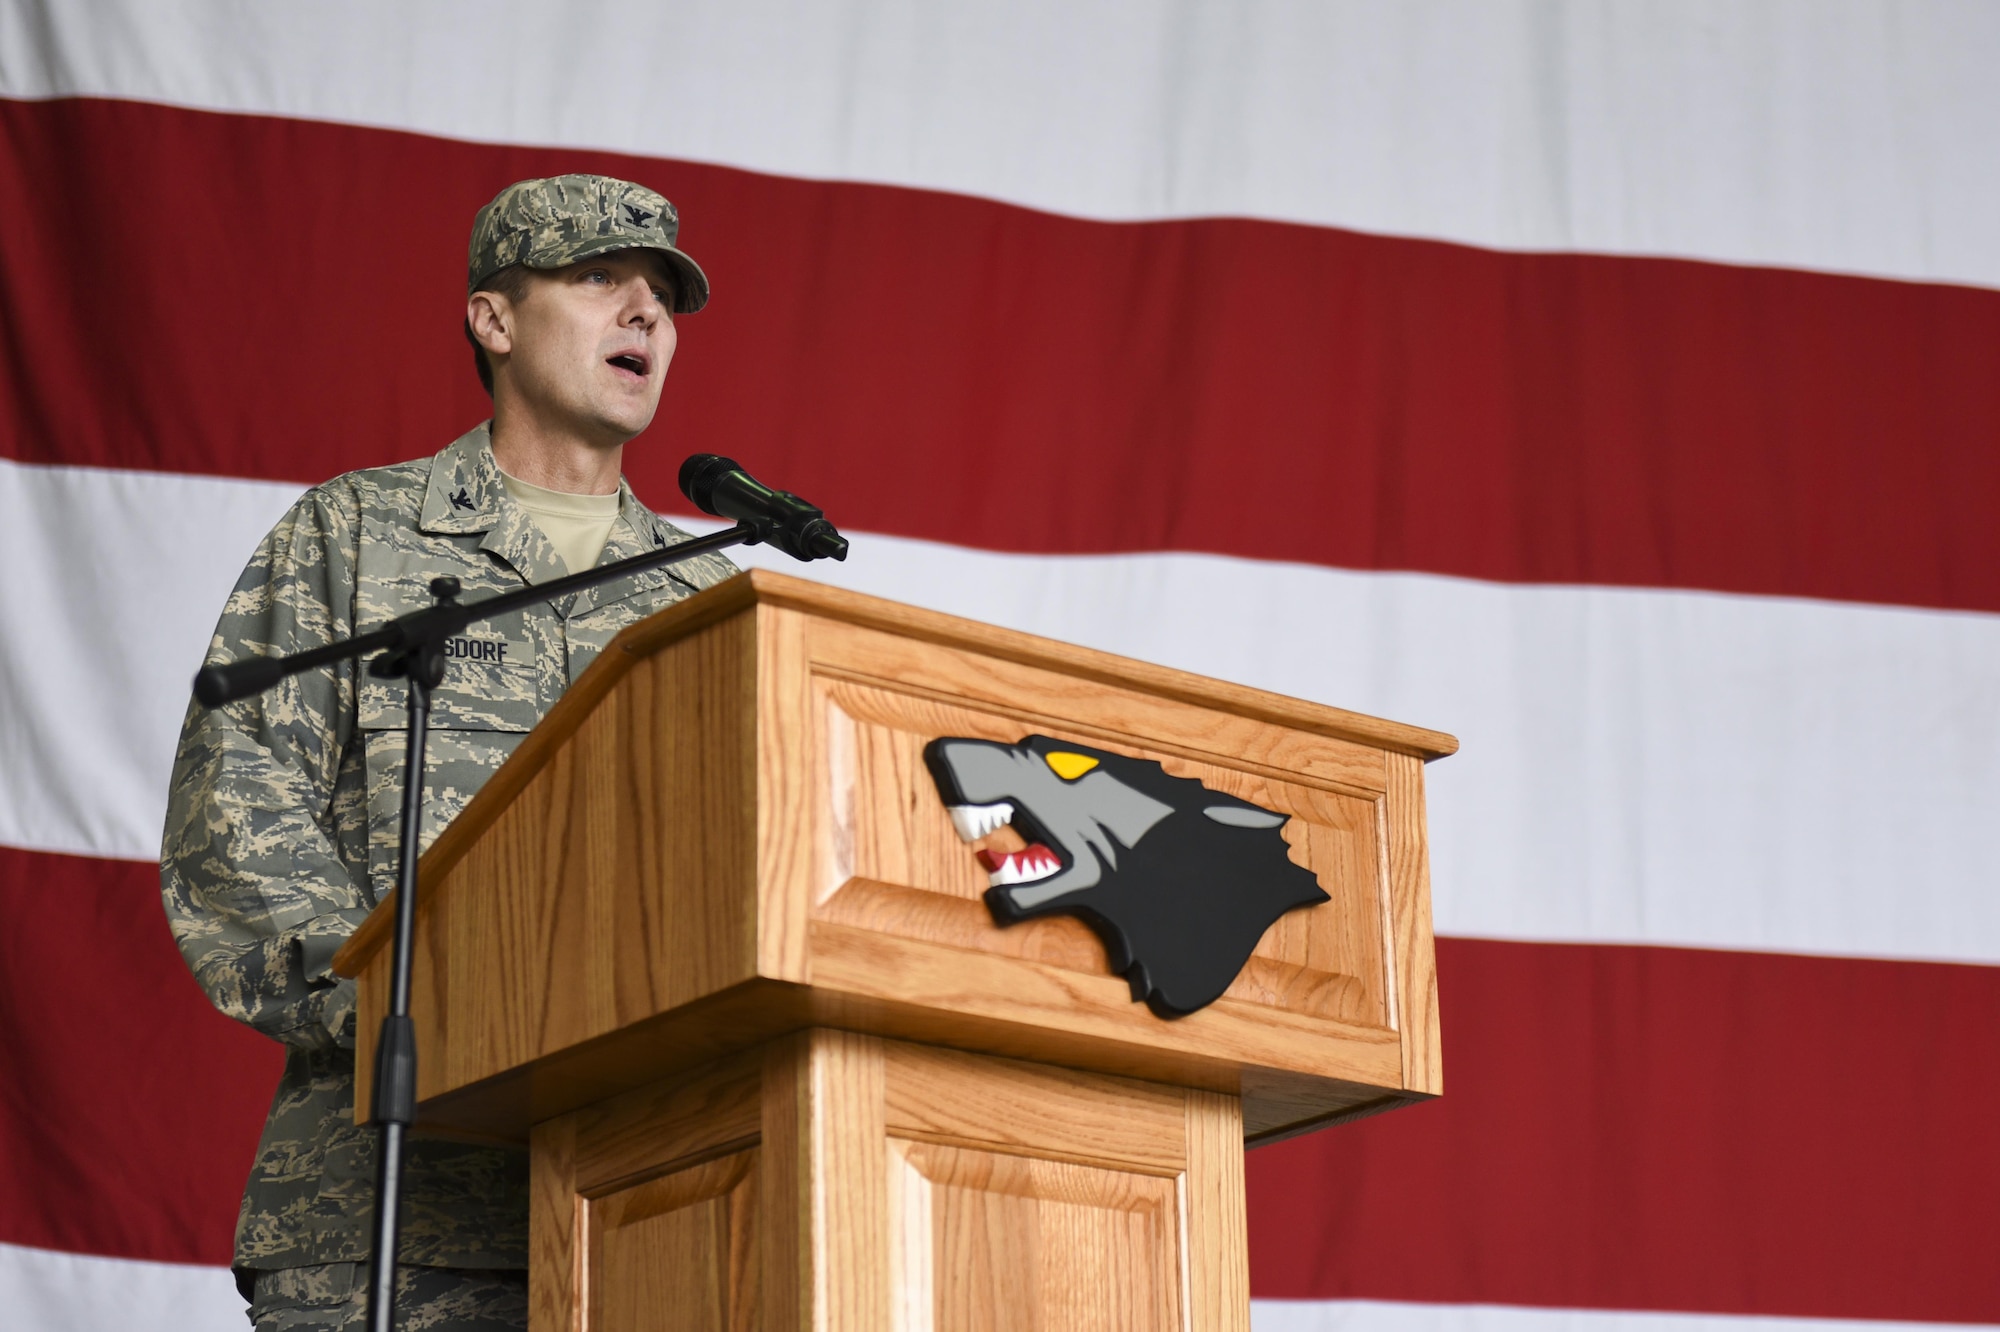 U.S. Air Force Col. Michael Zuhlsdorf, 8th Mission Support Group commander, talks to the 8th Fighter Wing during a change of command ceremony at Kunsan Air Base, Republic of Korea, June 8, 2017. Col. Zuhlsdorf received command of the 8th MSG from Col. Richard McKee during the ceremony and received the title of “Falcon”. (U.S. Air Force photo by Senior Airman Michael Hunsaker/Released)